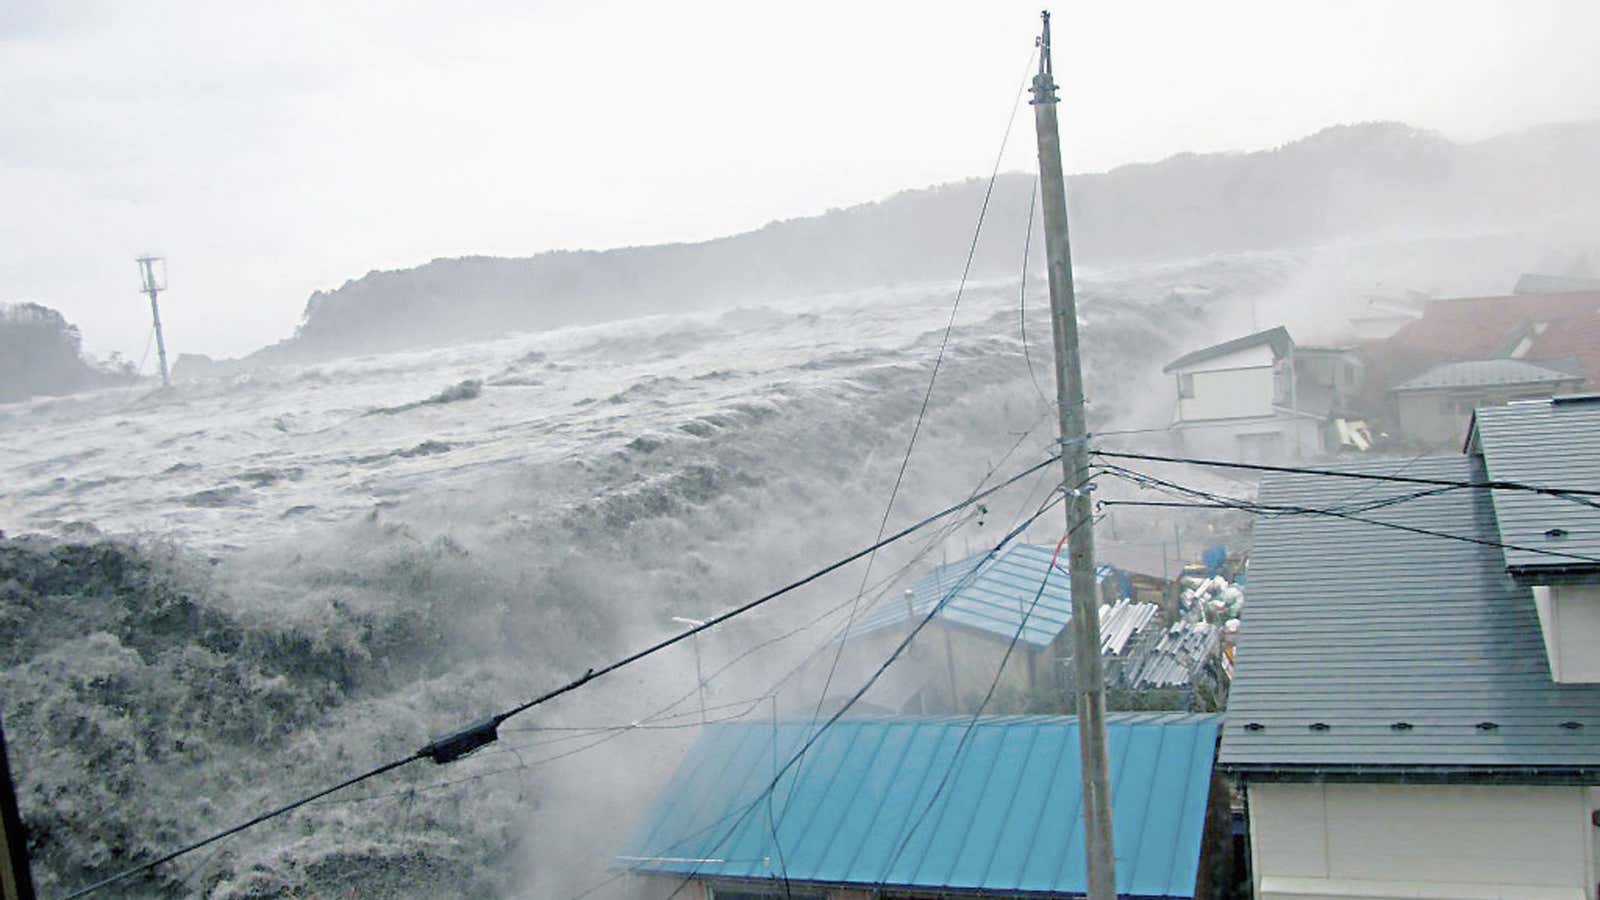 The tsunami that hit Japan in March 2011.